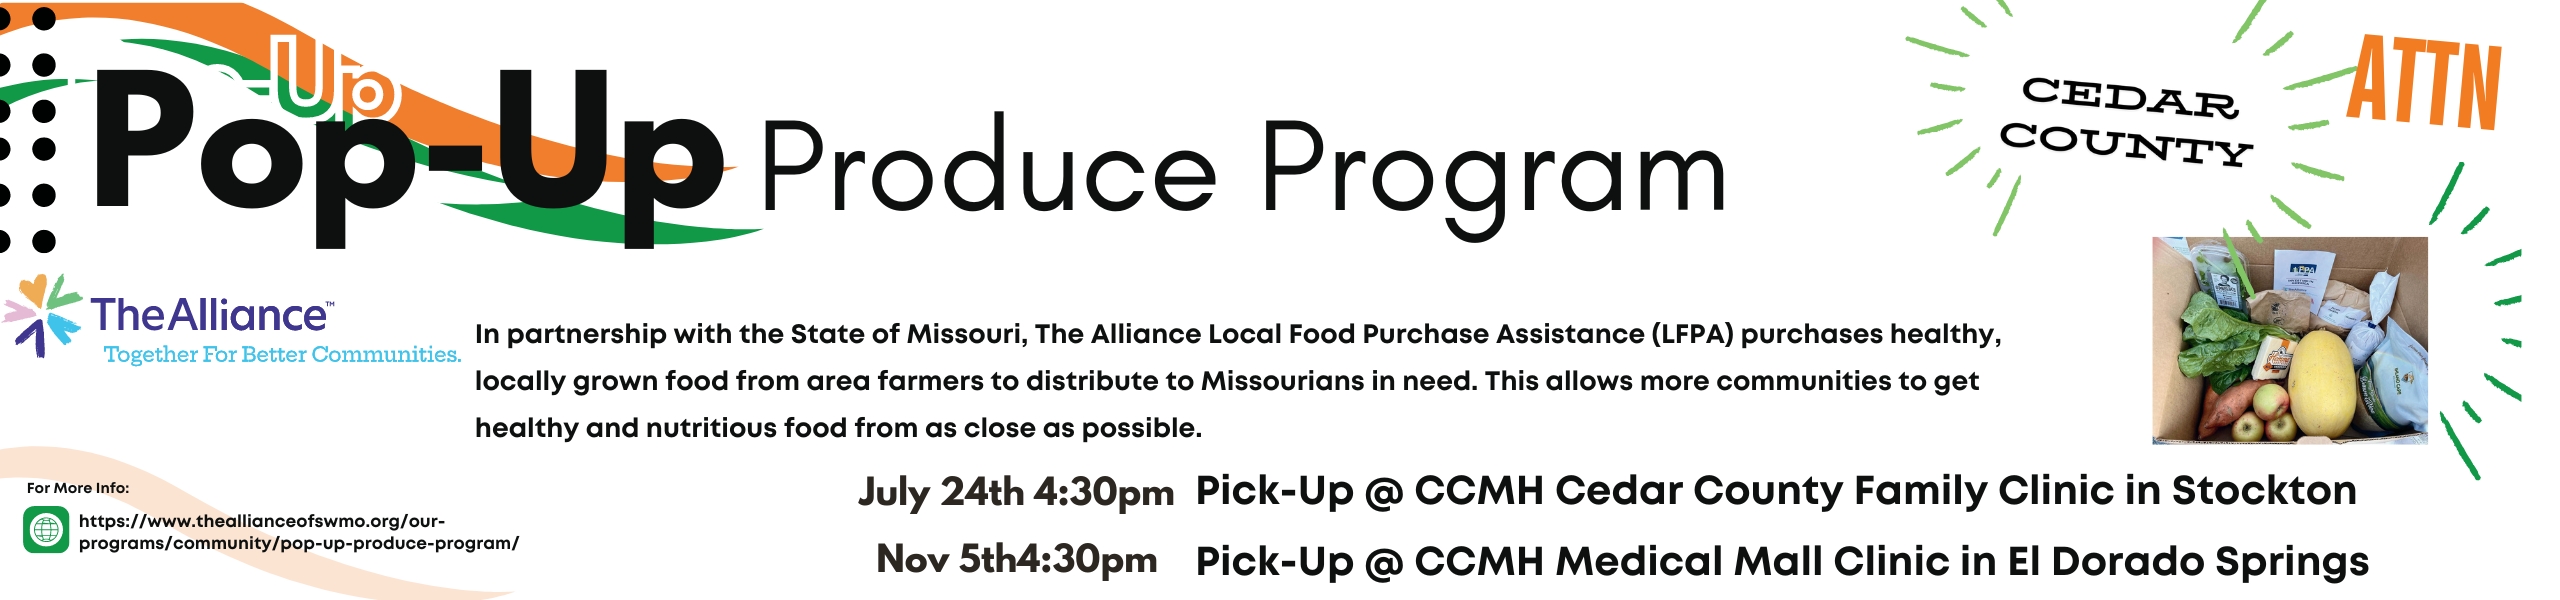 Pop up Produce program pick up in Stockton is July 24th at 4:30 PM at Cedar County Family Clinic 

Pick up in El dorado Springs is November 5th at 4:30 PM at CCMH Med Mall Clinic